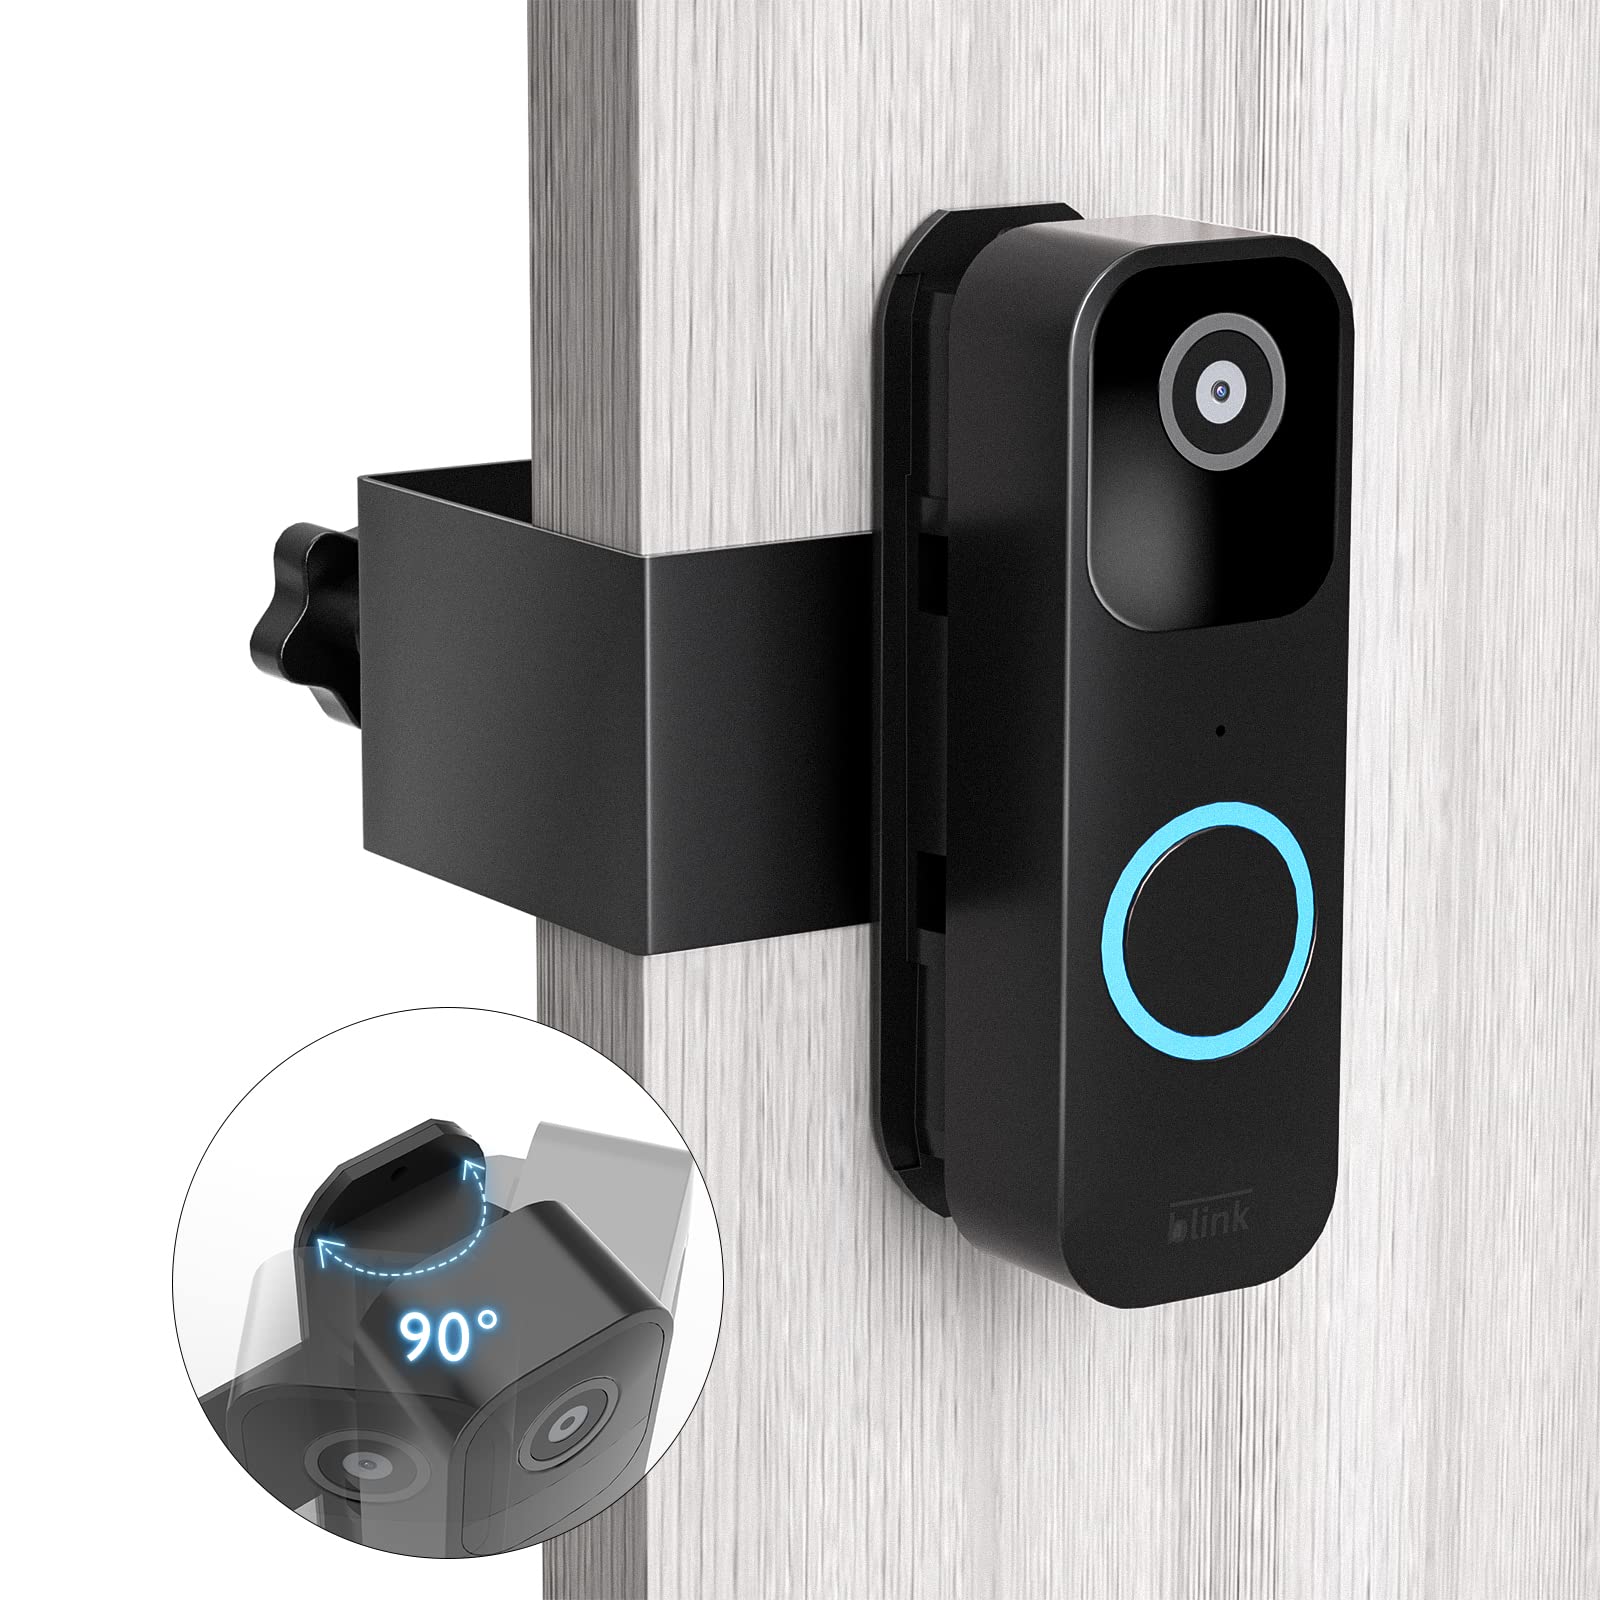 Are Doorbell Cameras Legal in Apartments